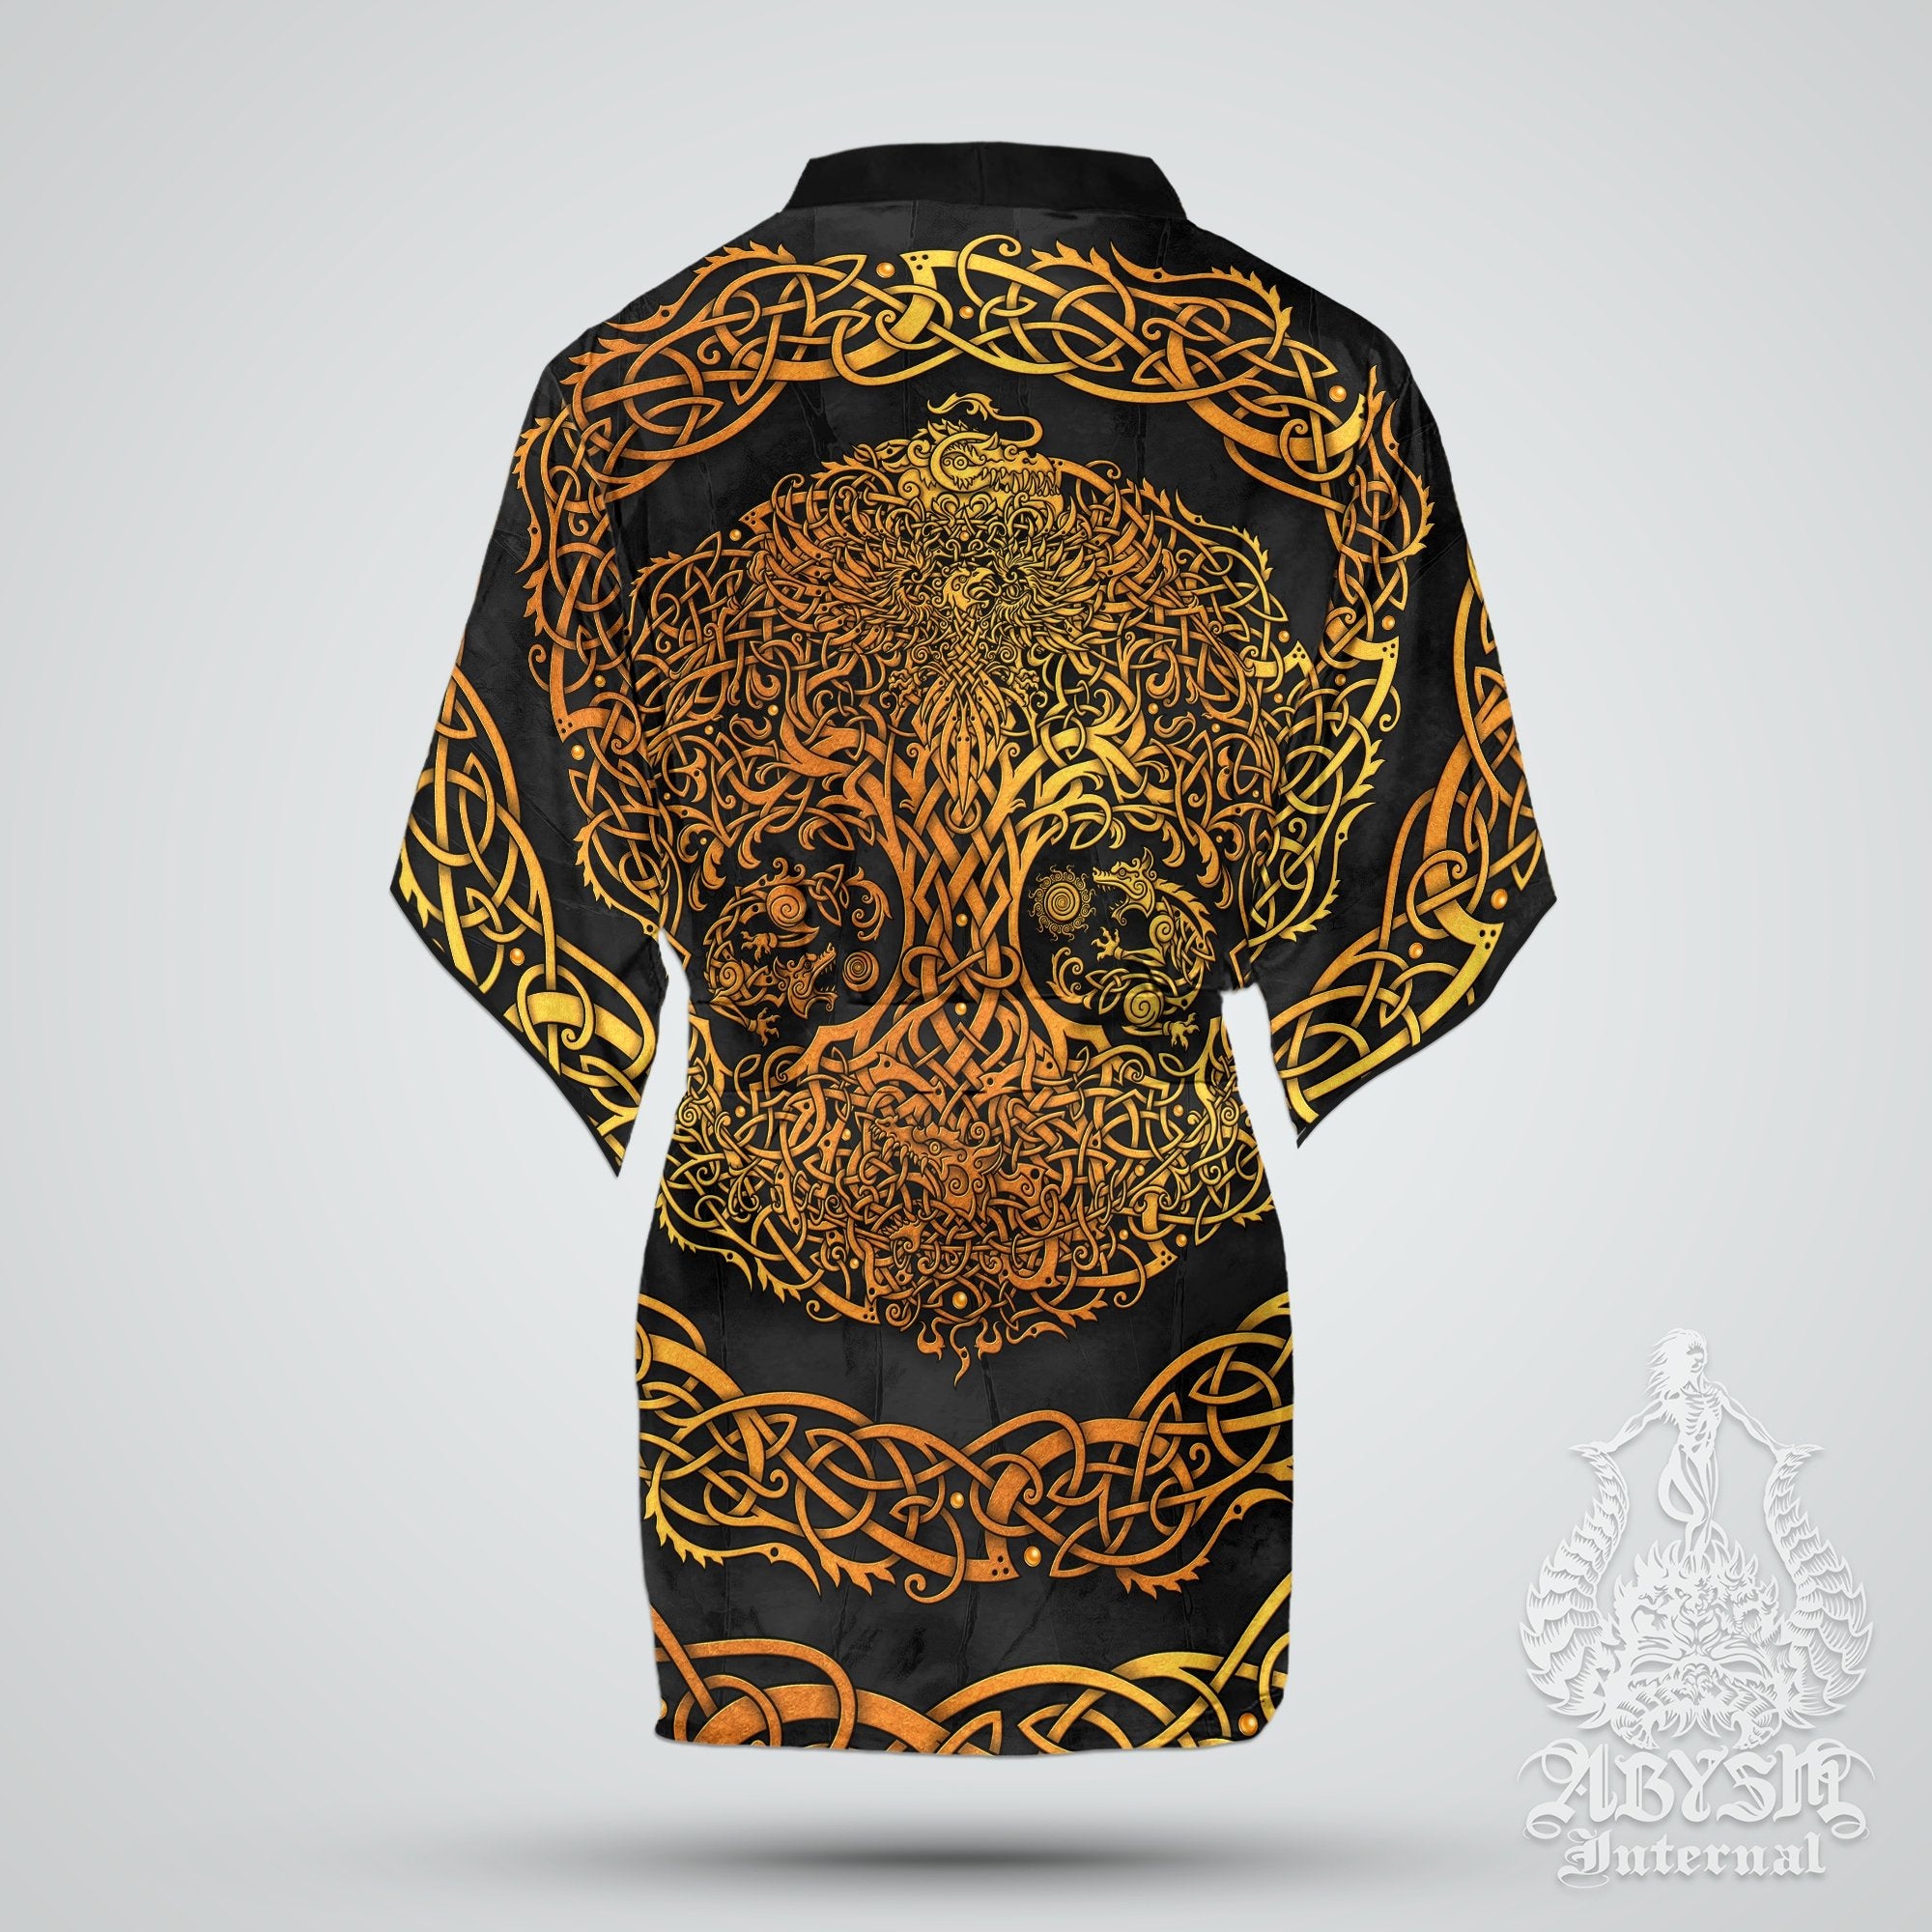 Viking Cover Up, Beach Outfit, Yggdrasil Party Kimono, Summer Festival Robe, Norse Indie and Alternative Clothing, Unisex - Tree of Life, Gold Black - Abysm Internal